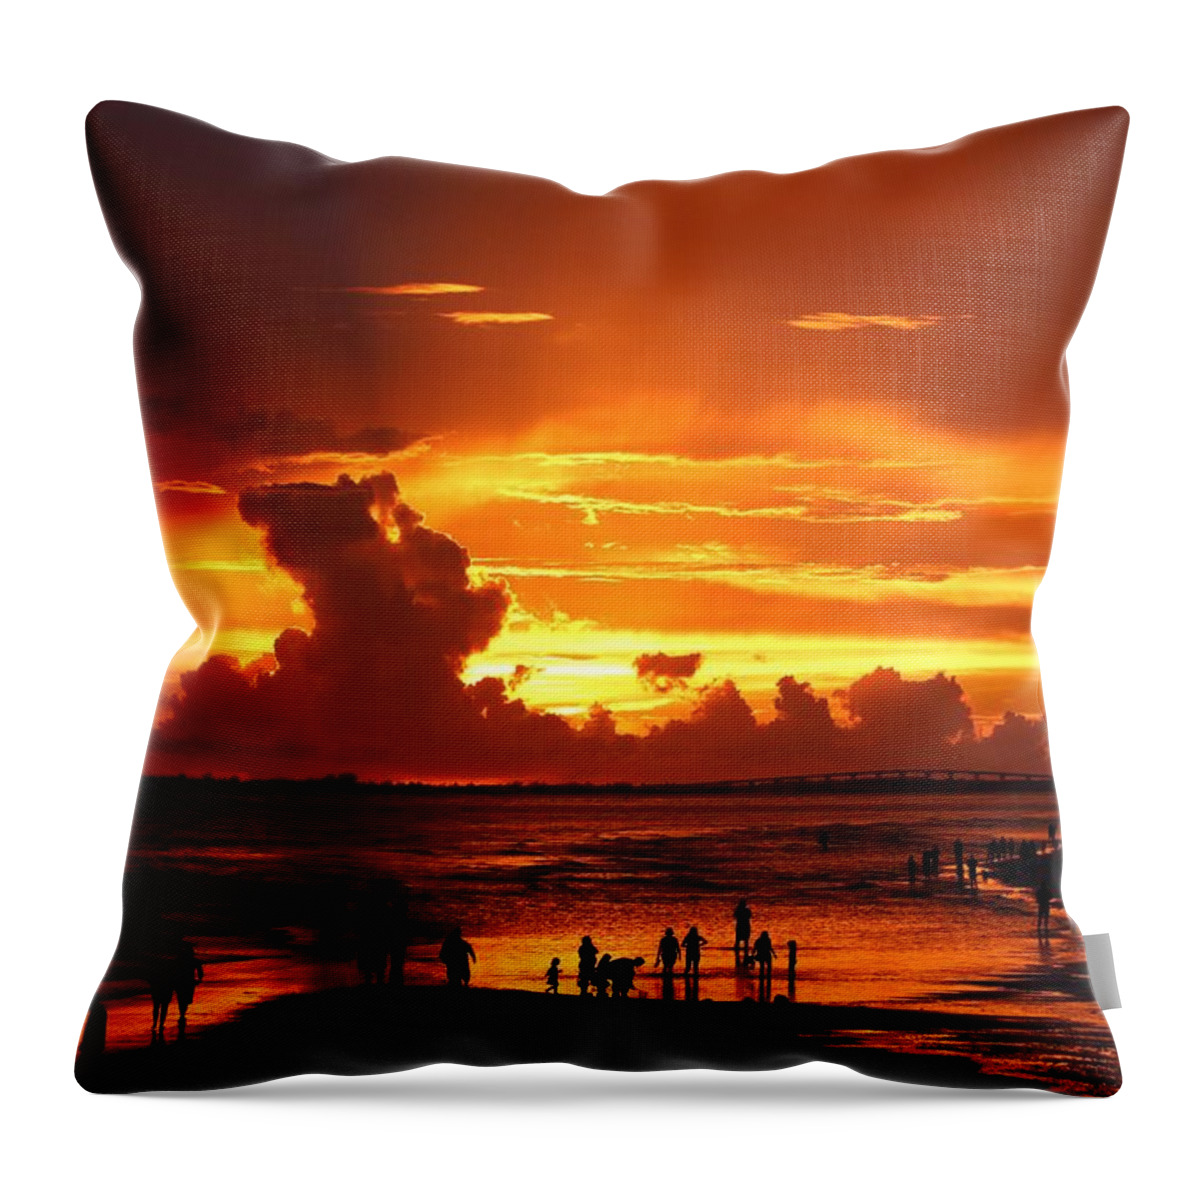 Sunset Throw Pillow featuring the photograph Sunset by Mingming Jiang